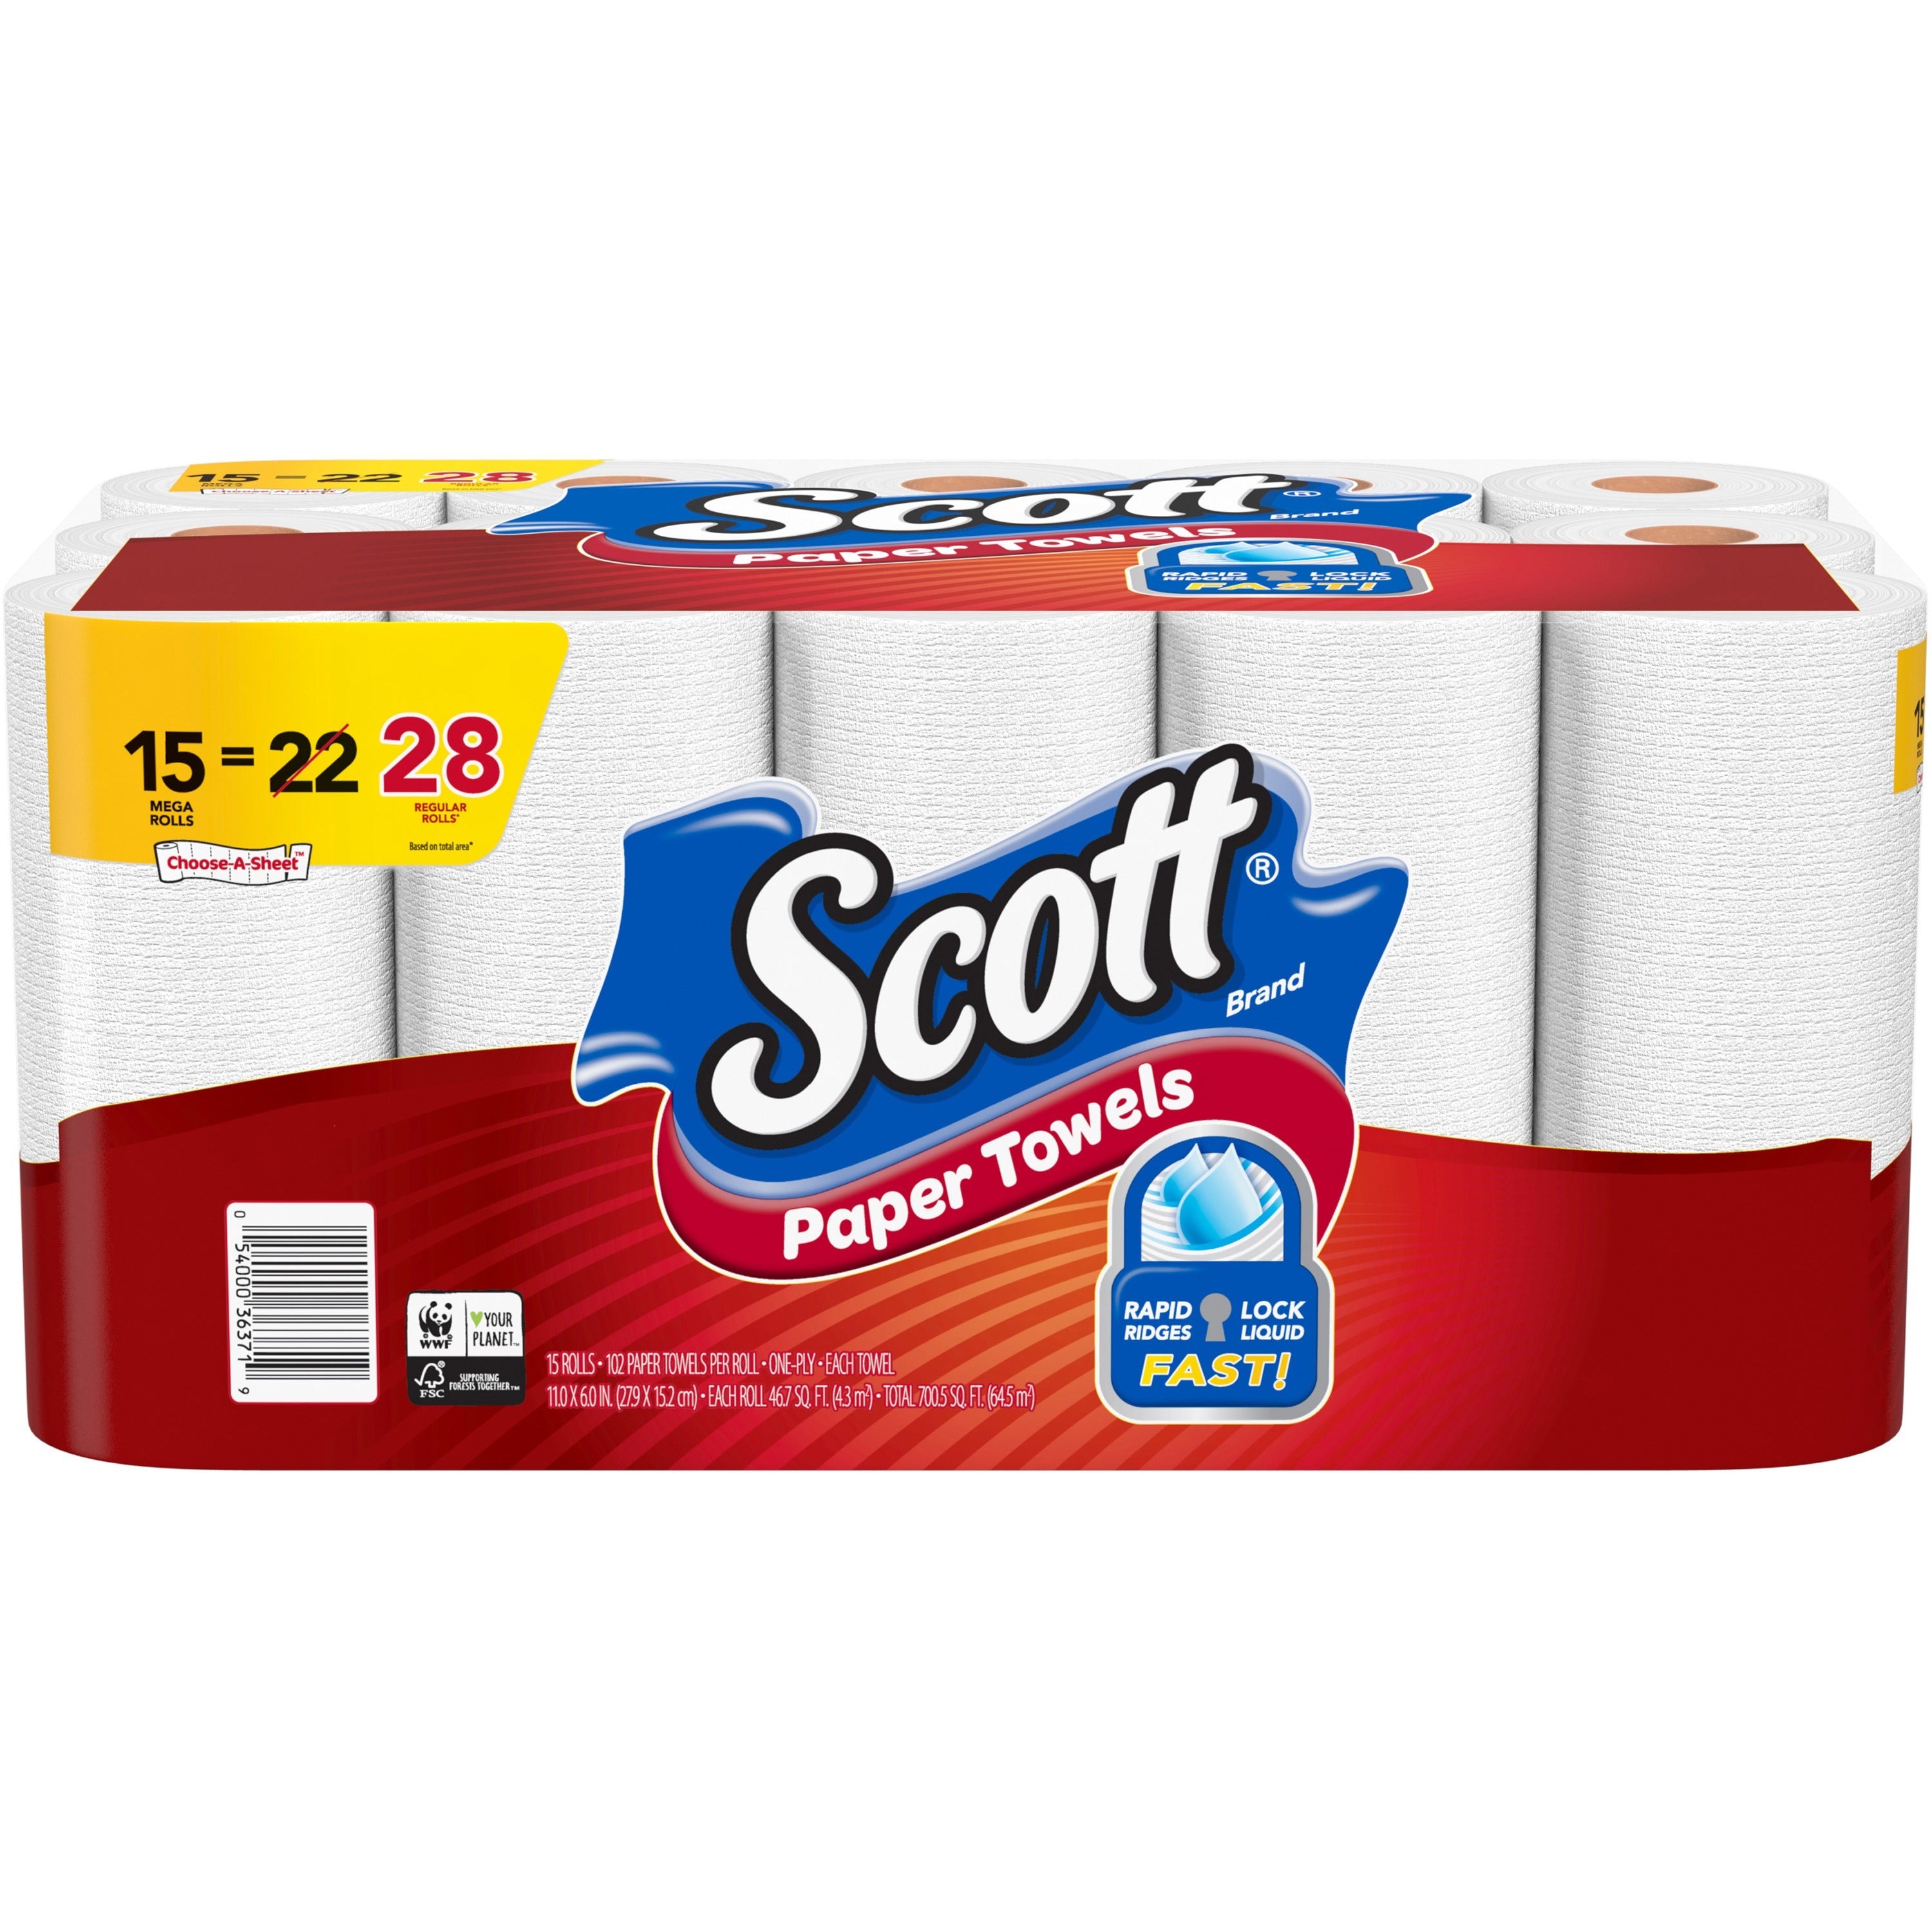 scott-choose-a-sheet-paper-towels-mega-rolls-1-ply-102-sheets-roll-white-perforated-absorbent-durable-for-home-office-school-15-rolls-per-pack-2-carton_kcc36371ct - 2